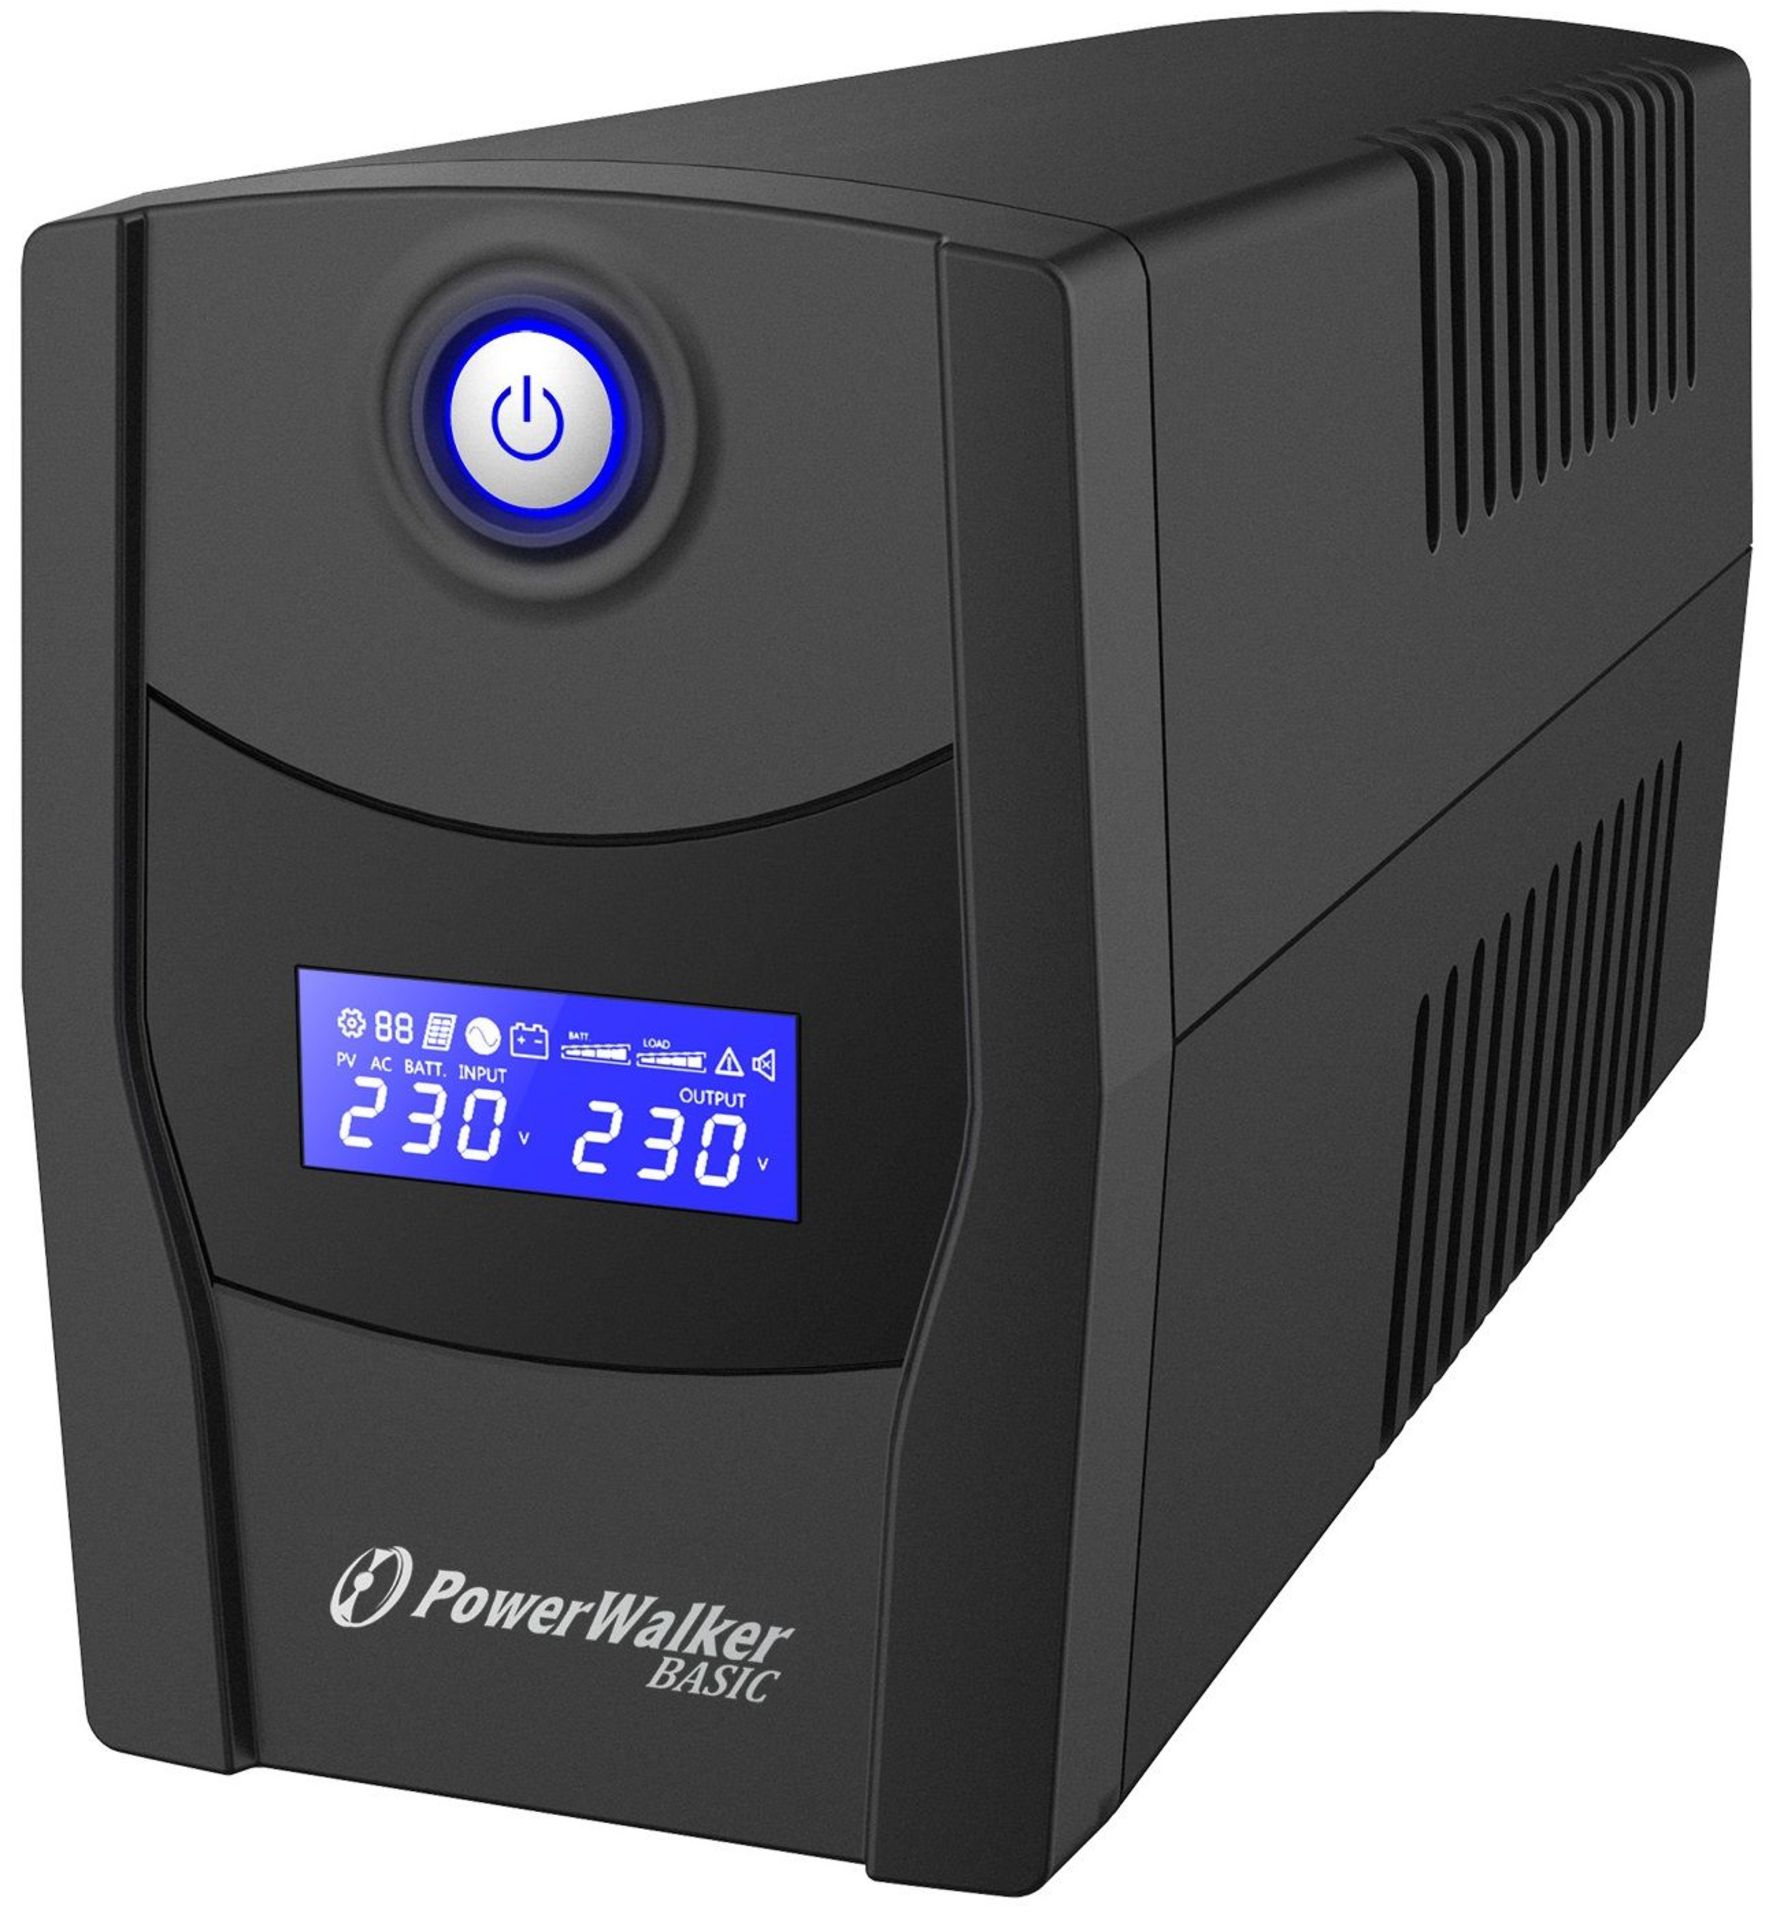 Powerwalker STL UPS 800 VA. - P1. Offering reliable power protection while keeping you informed